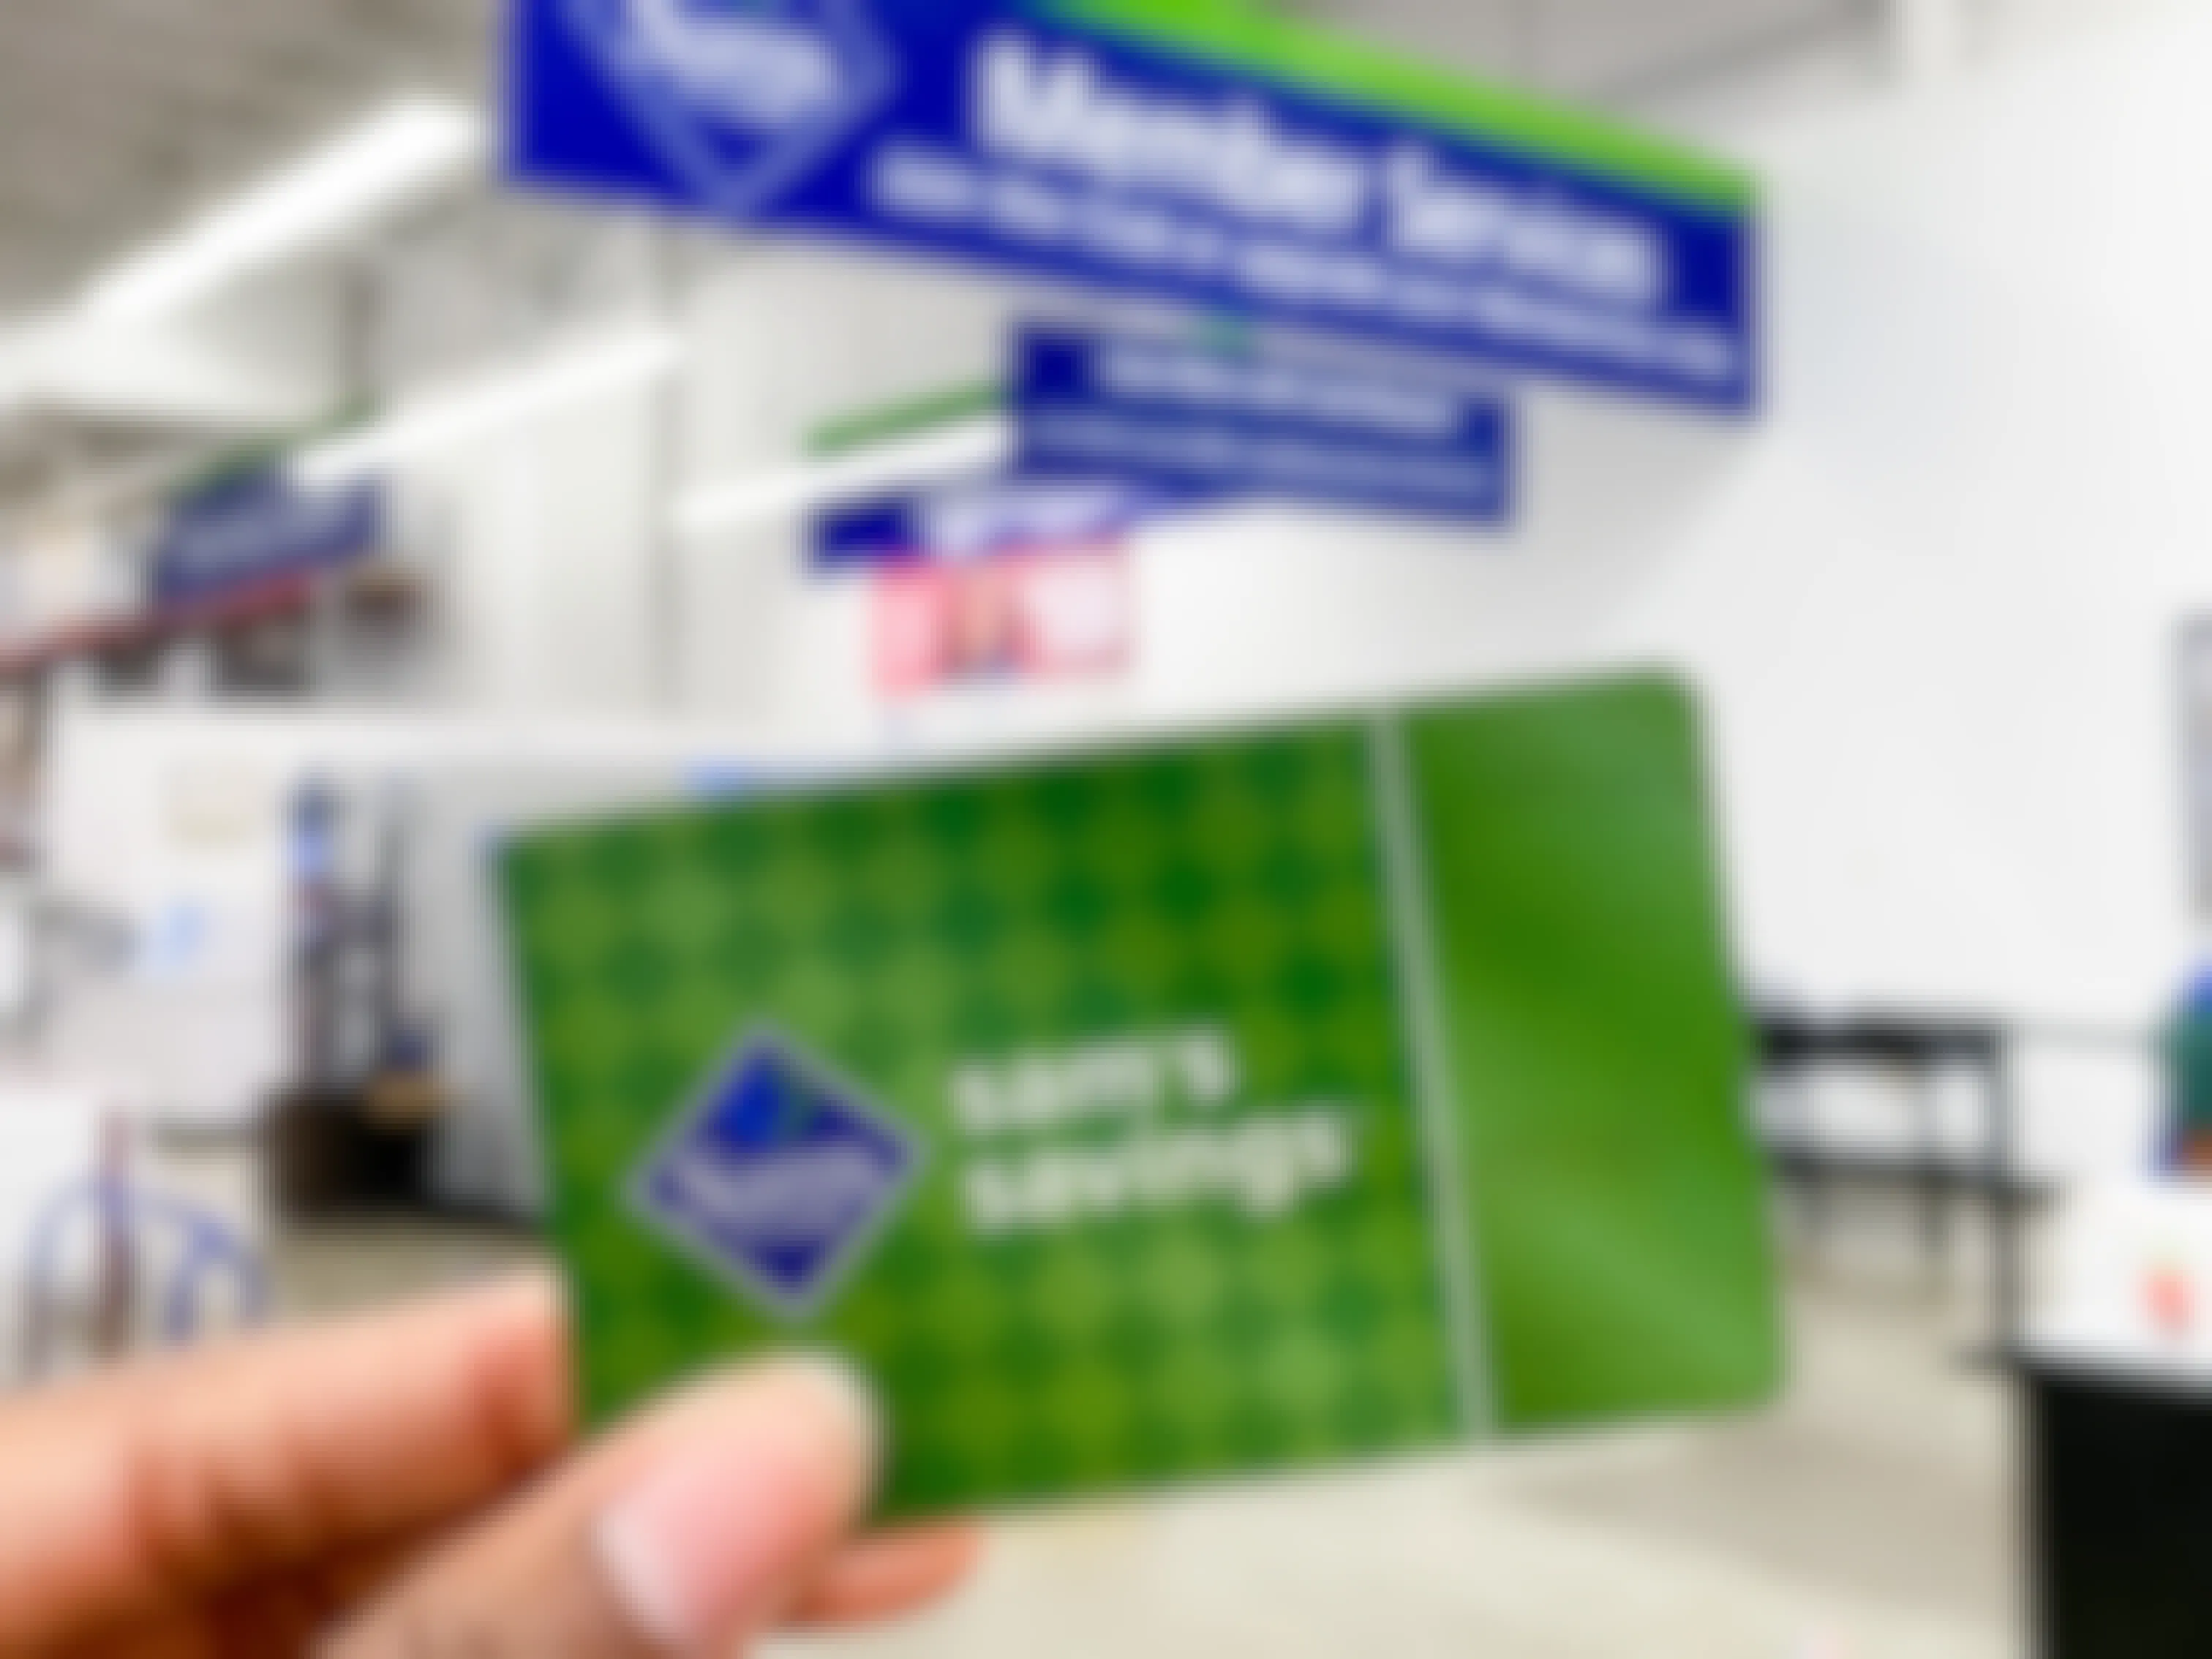 A person holding a Sam's Club membership card in front of the Member Services desk inside Sam's Club.